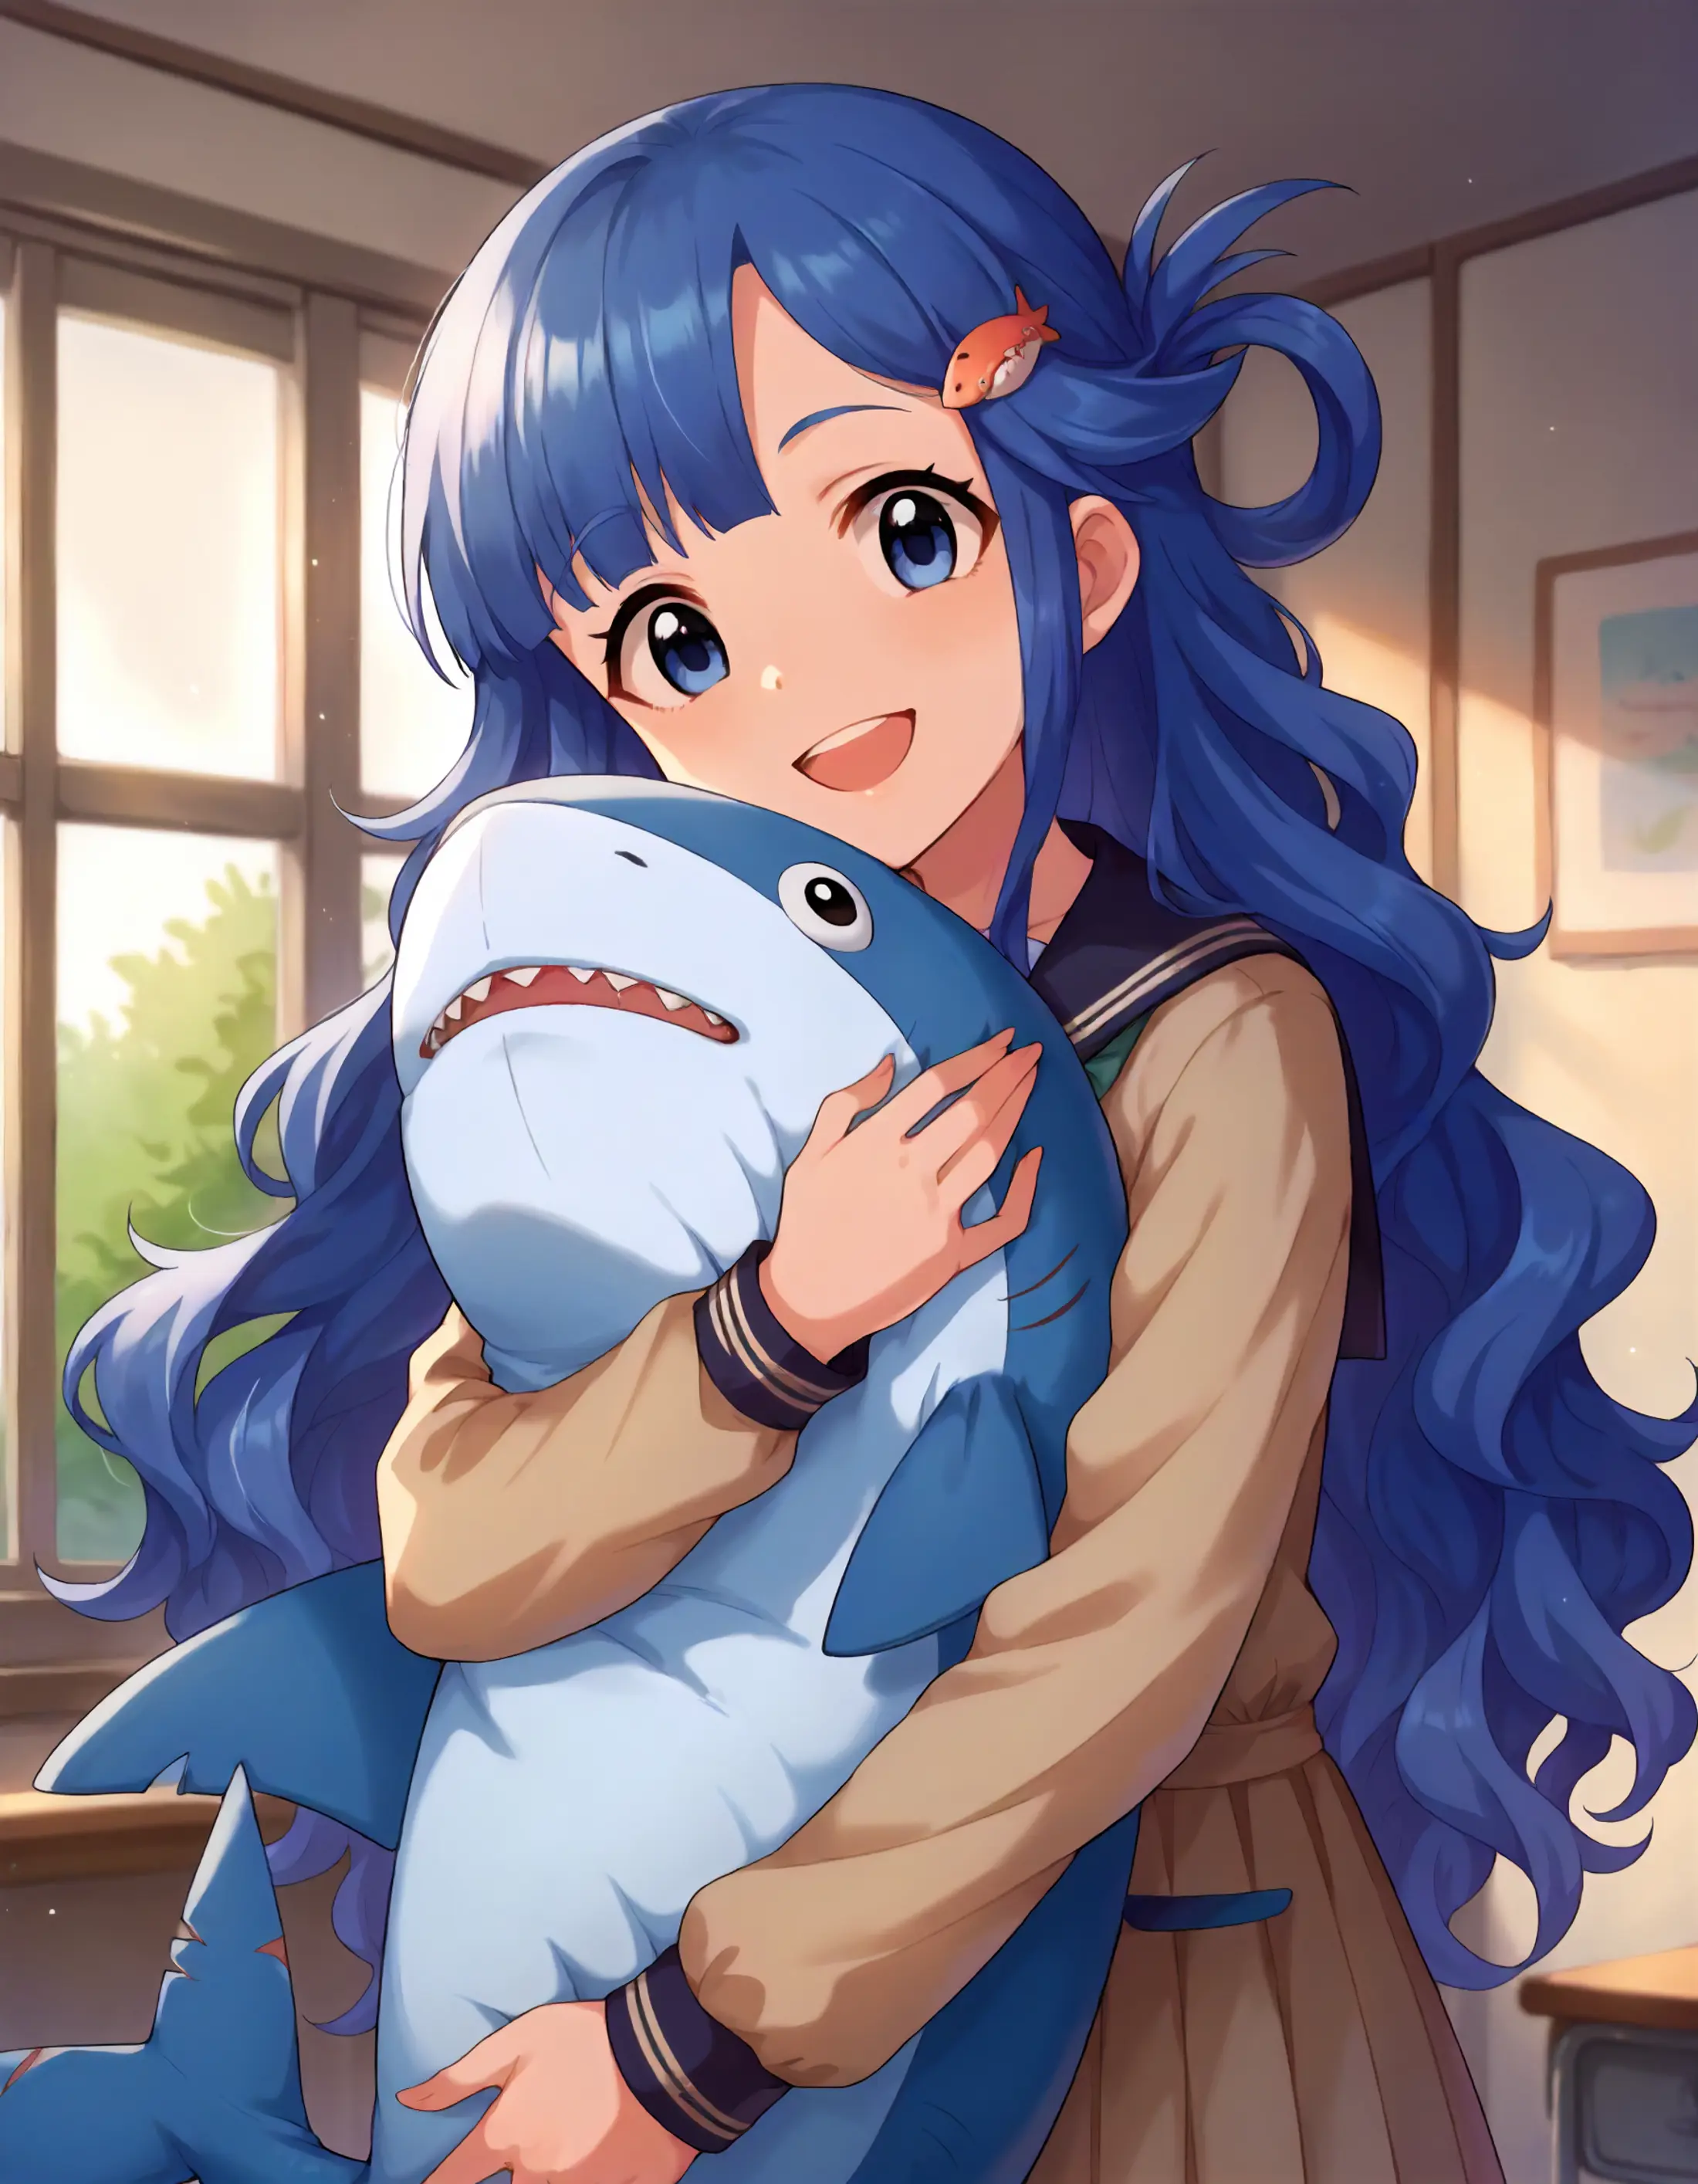 A girl with long blue hair, dressed in a school uniform, embracing a large plush shark. The scene is set in a warmly lit room, with a window and a desk visible in the background. 